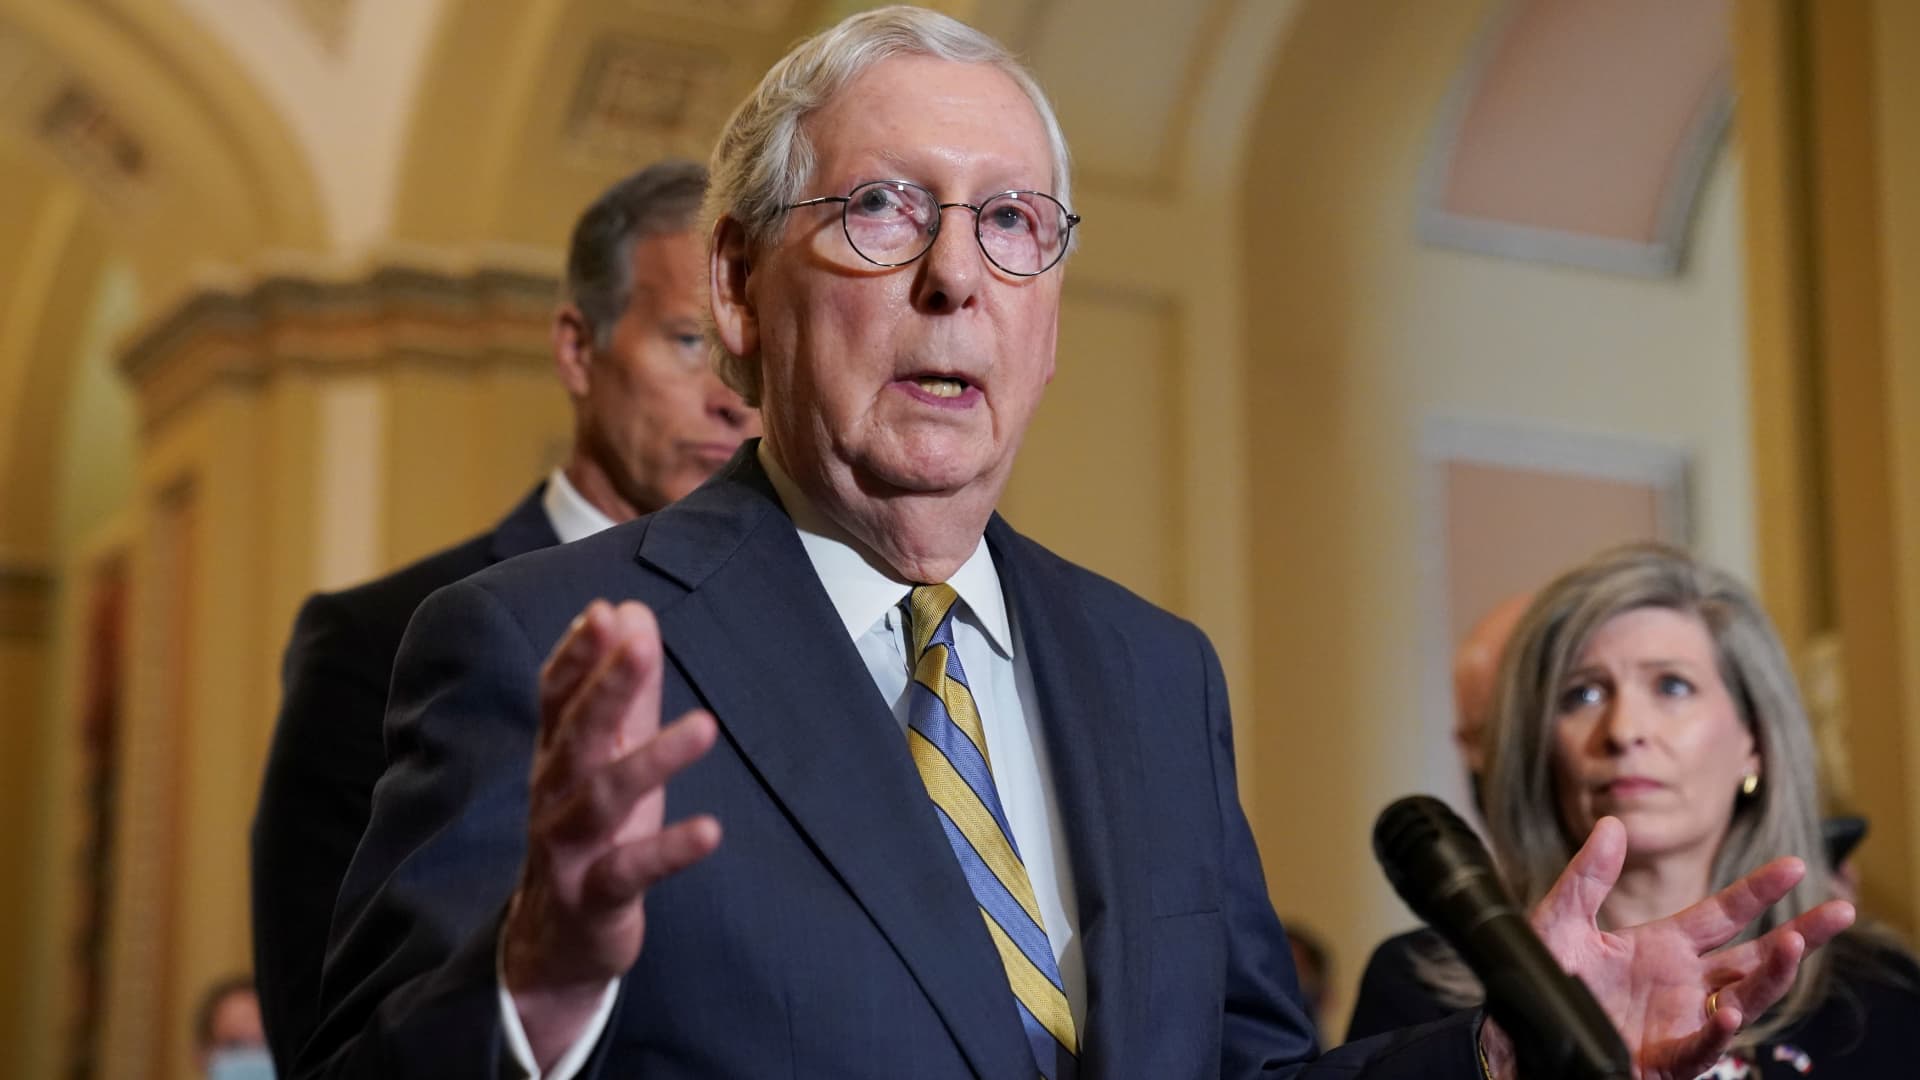 U.S. Senate Minority Leader Mitch McConnell speaks with reporters at the U.S. Capitol in Washington, August 3, 2021.